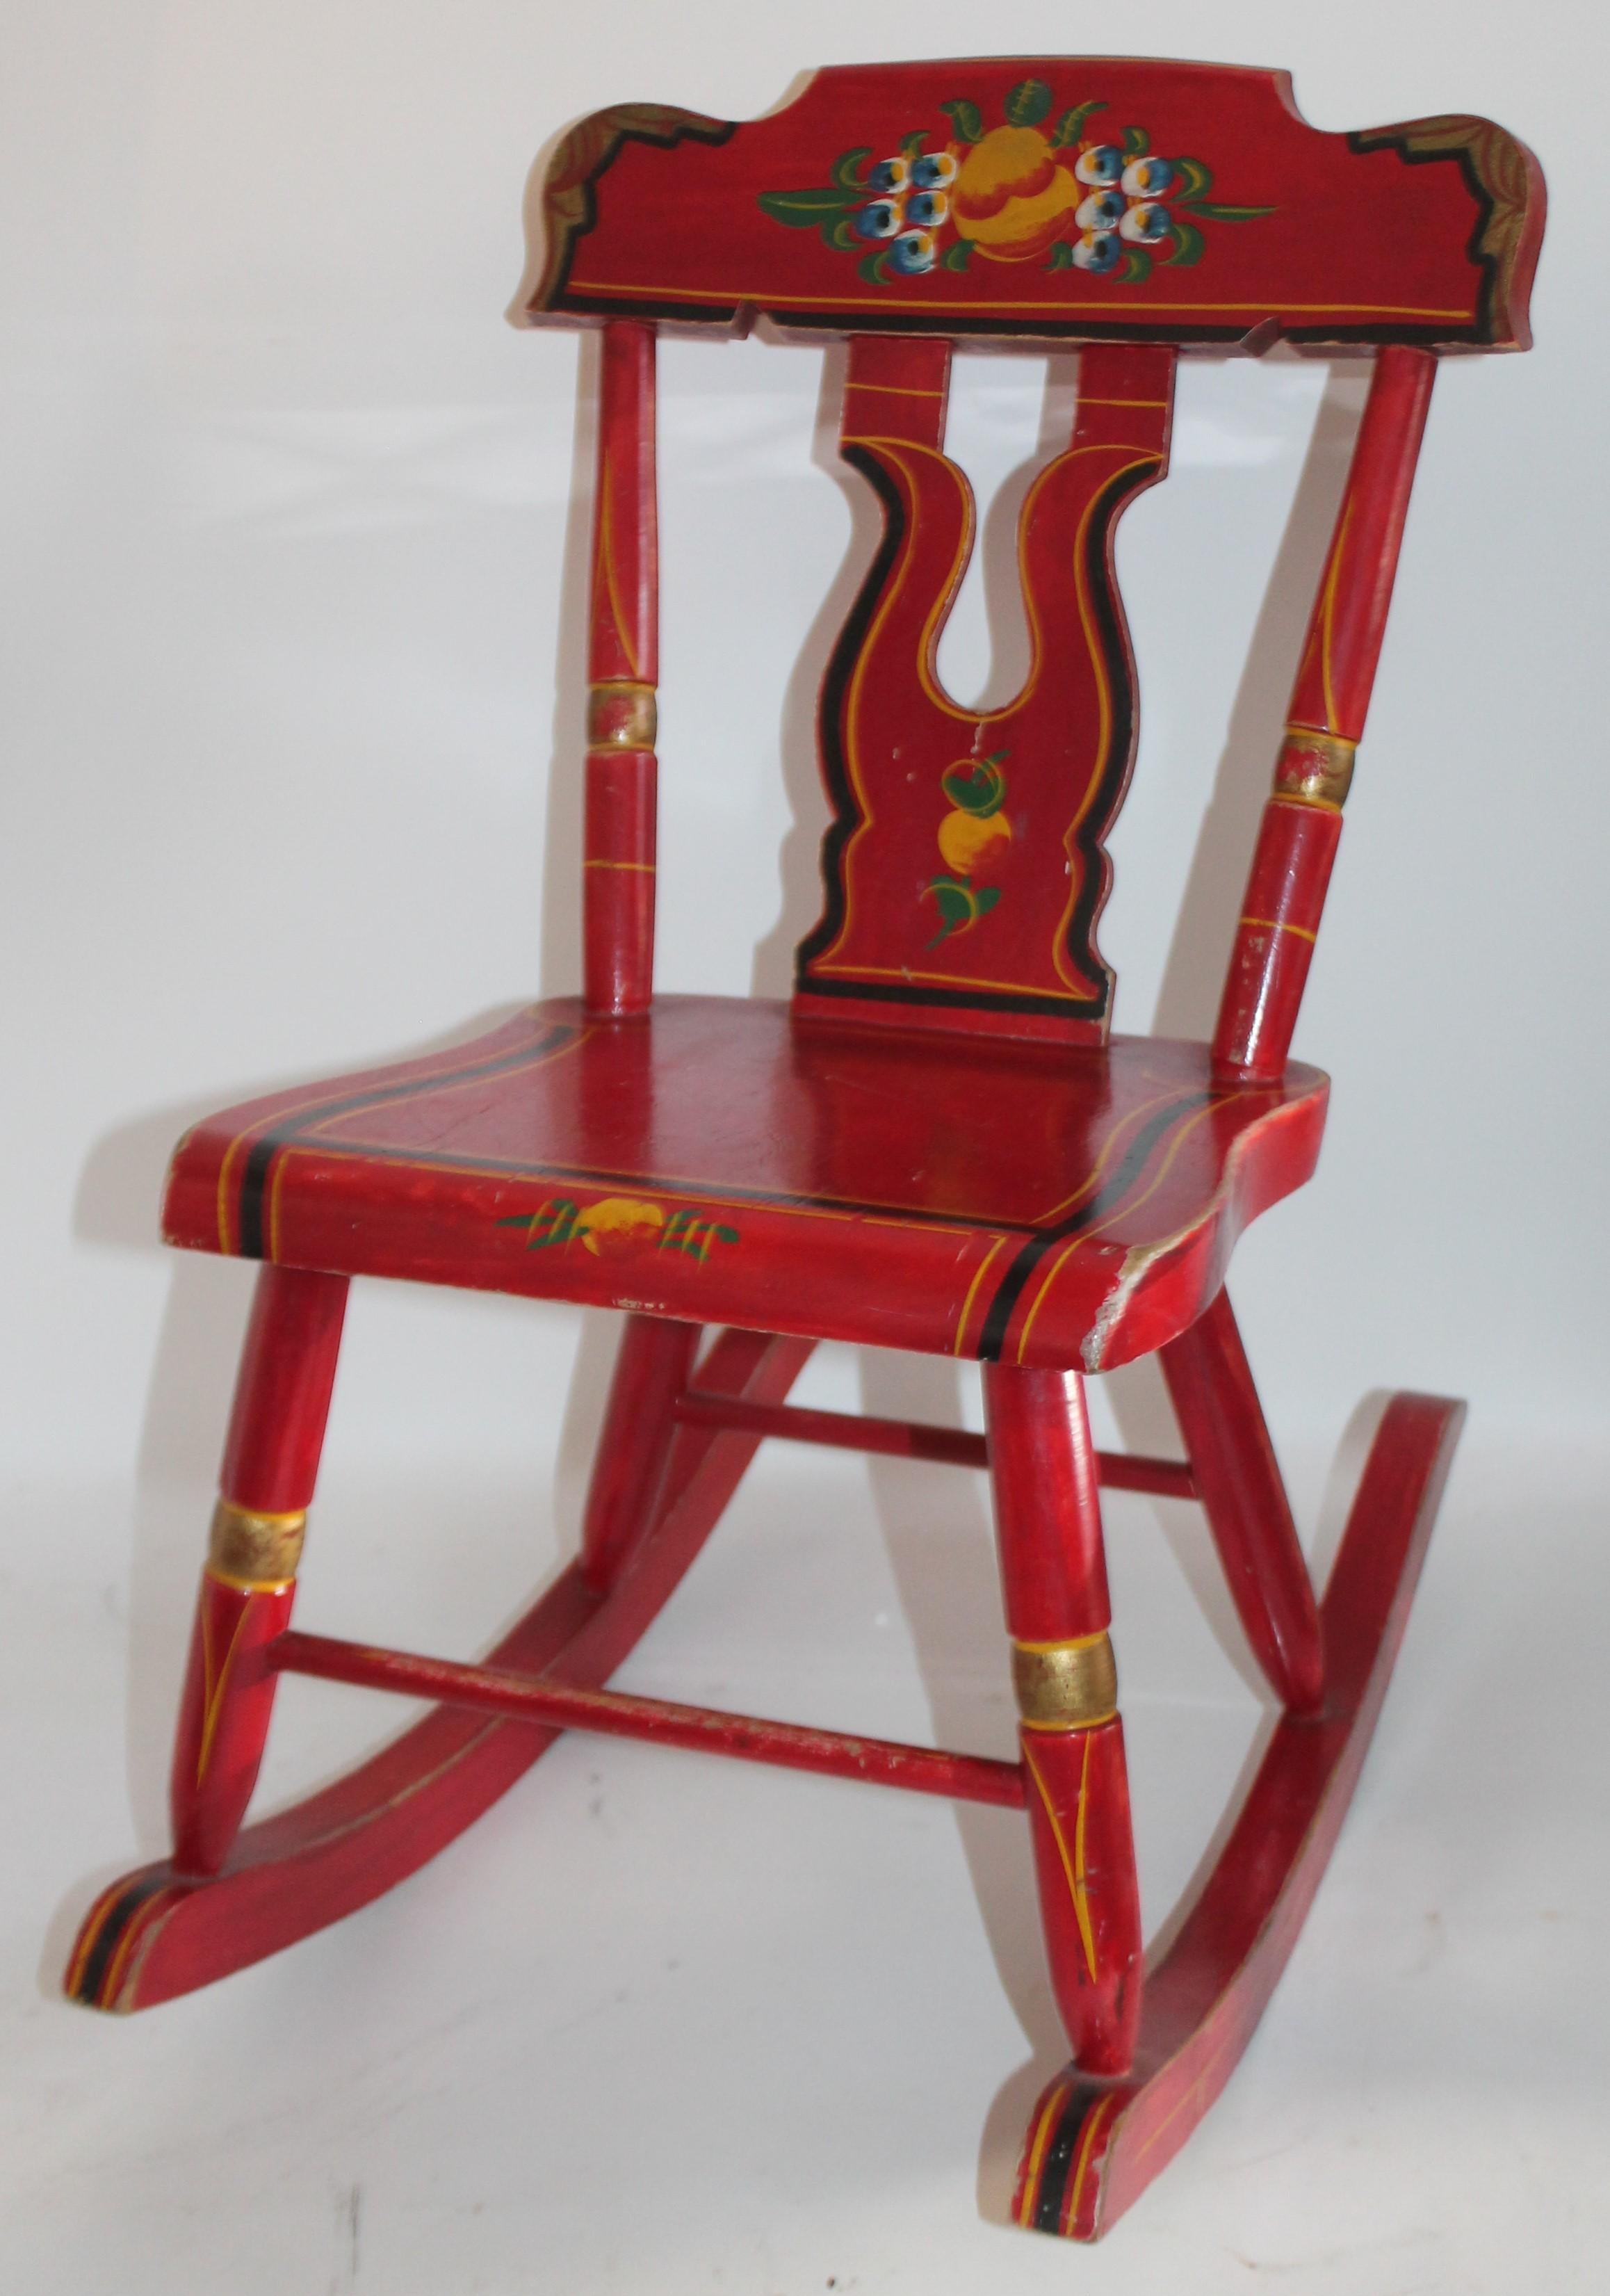 This early 20th century original red painted and decorated handmade children's rocking chair is in fine condition. It was made in Lancaster County, Pennsylvania.